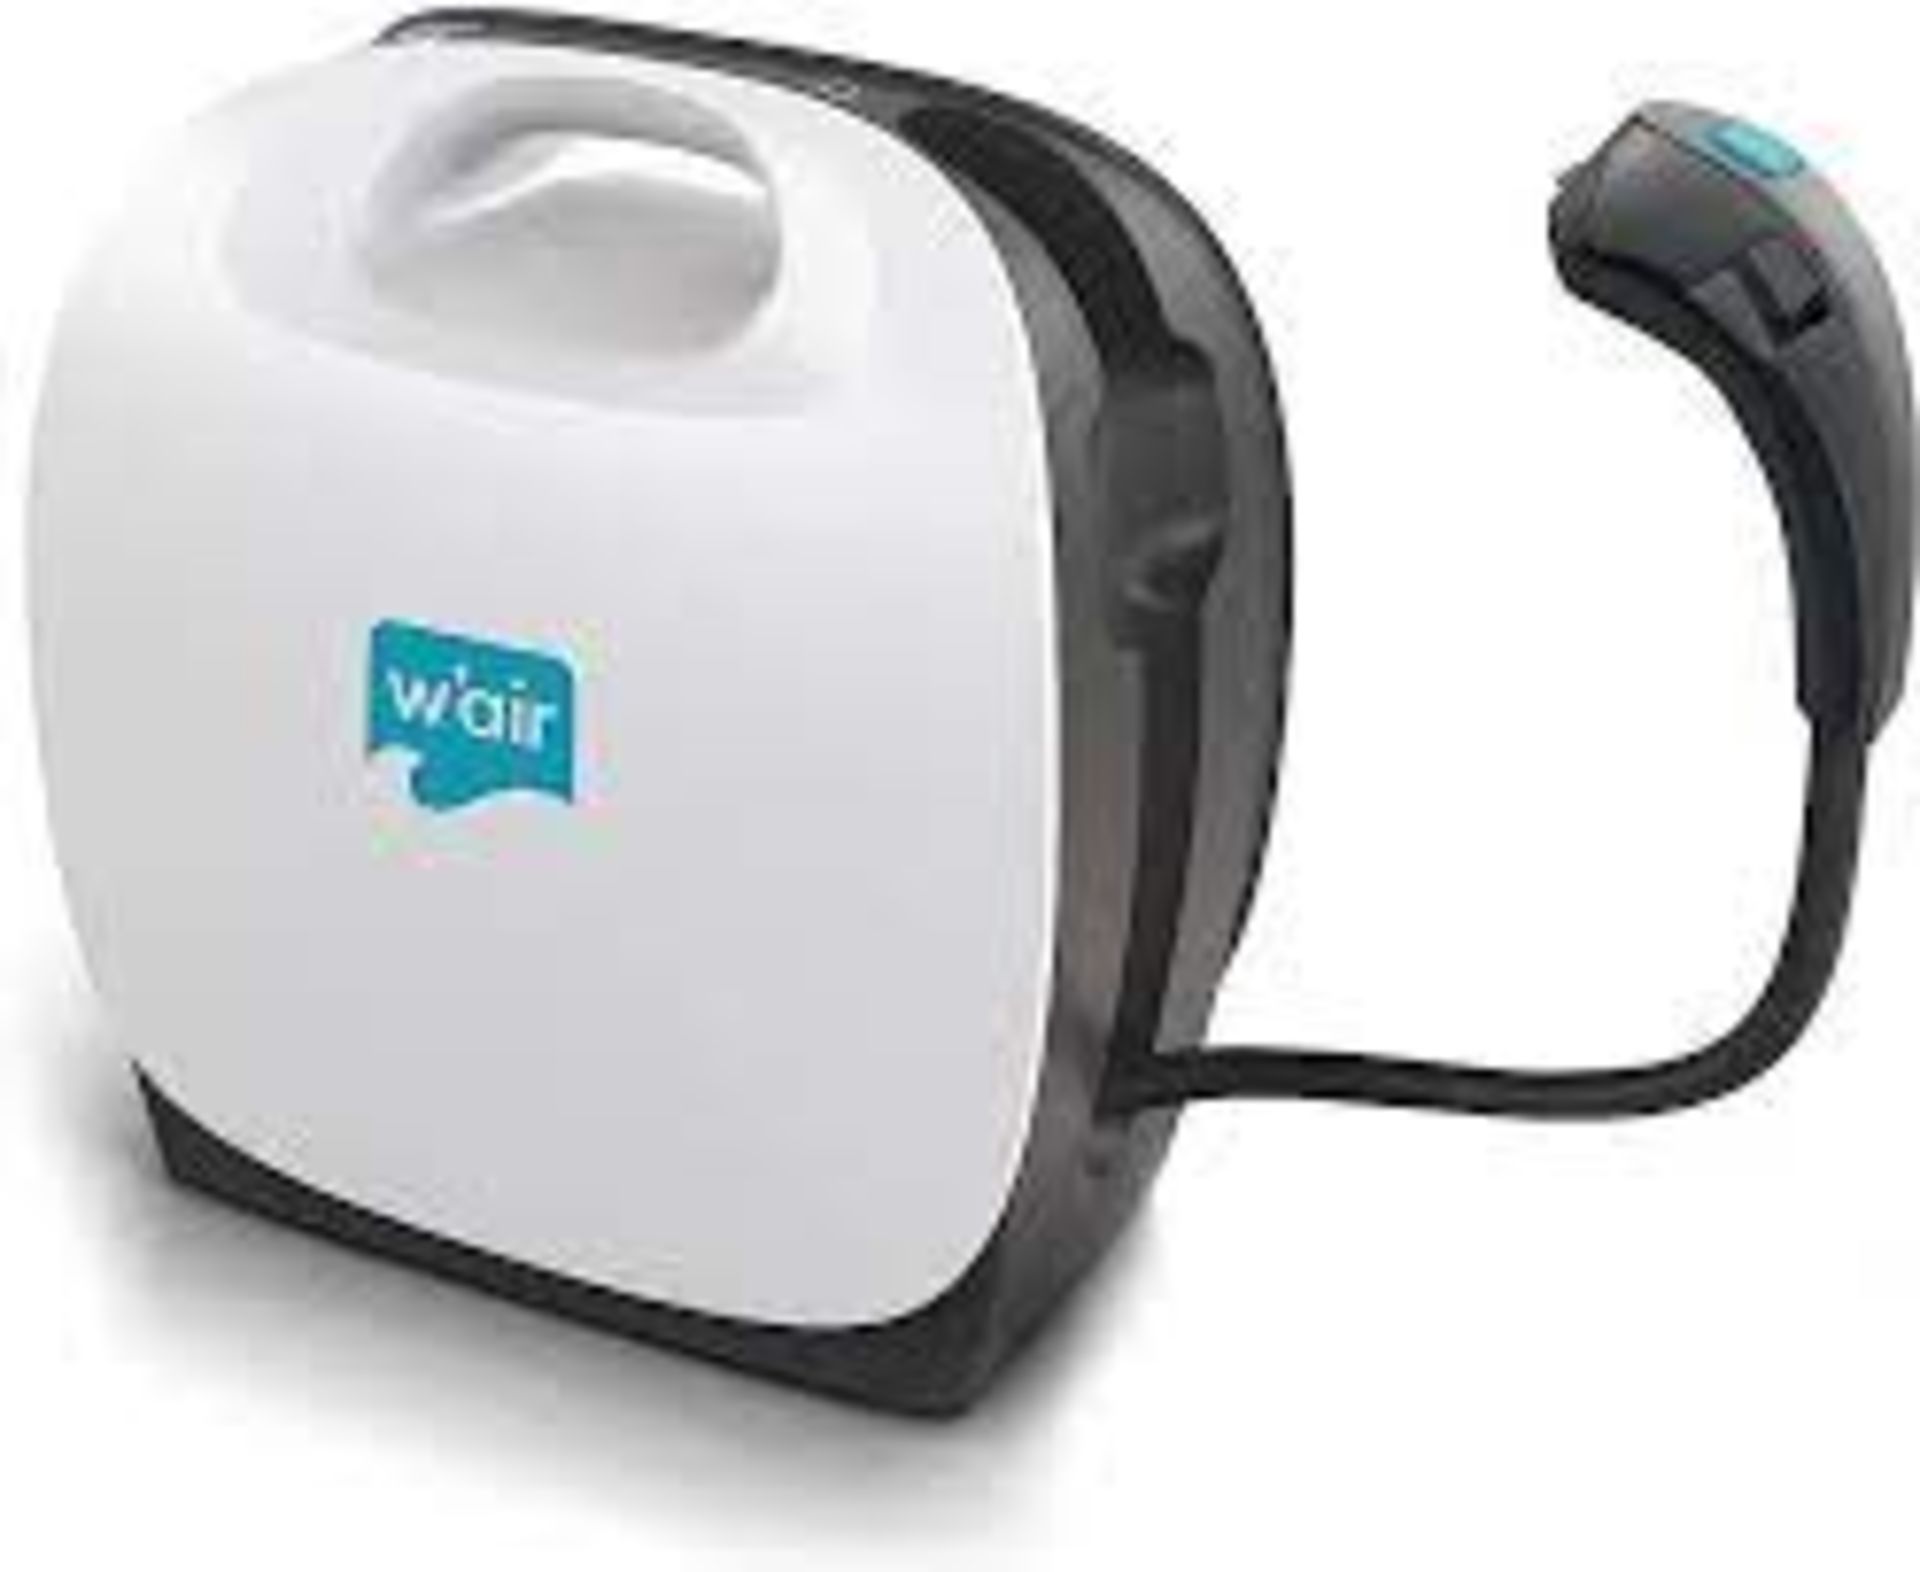 100 X BRAND NEW W'AIR SNEAKER CLEANING SYSTEMS RRP £299, The w'air uses hydrodynamic technology - Bild 6 aus 6